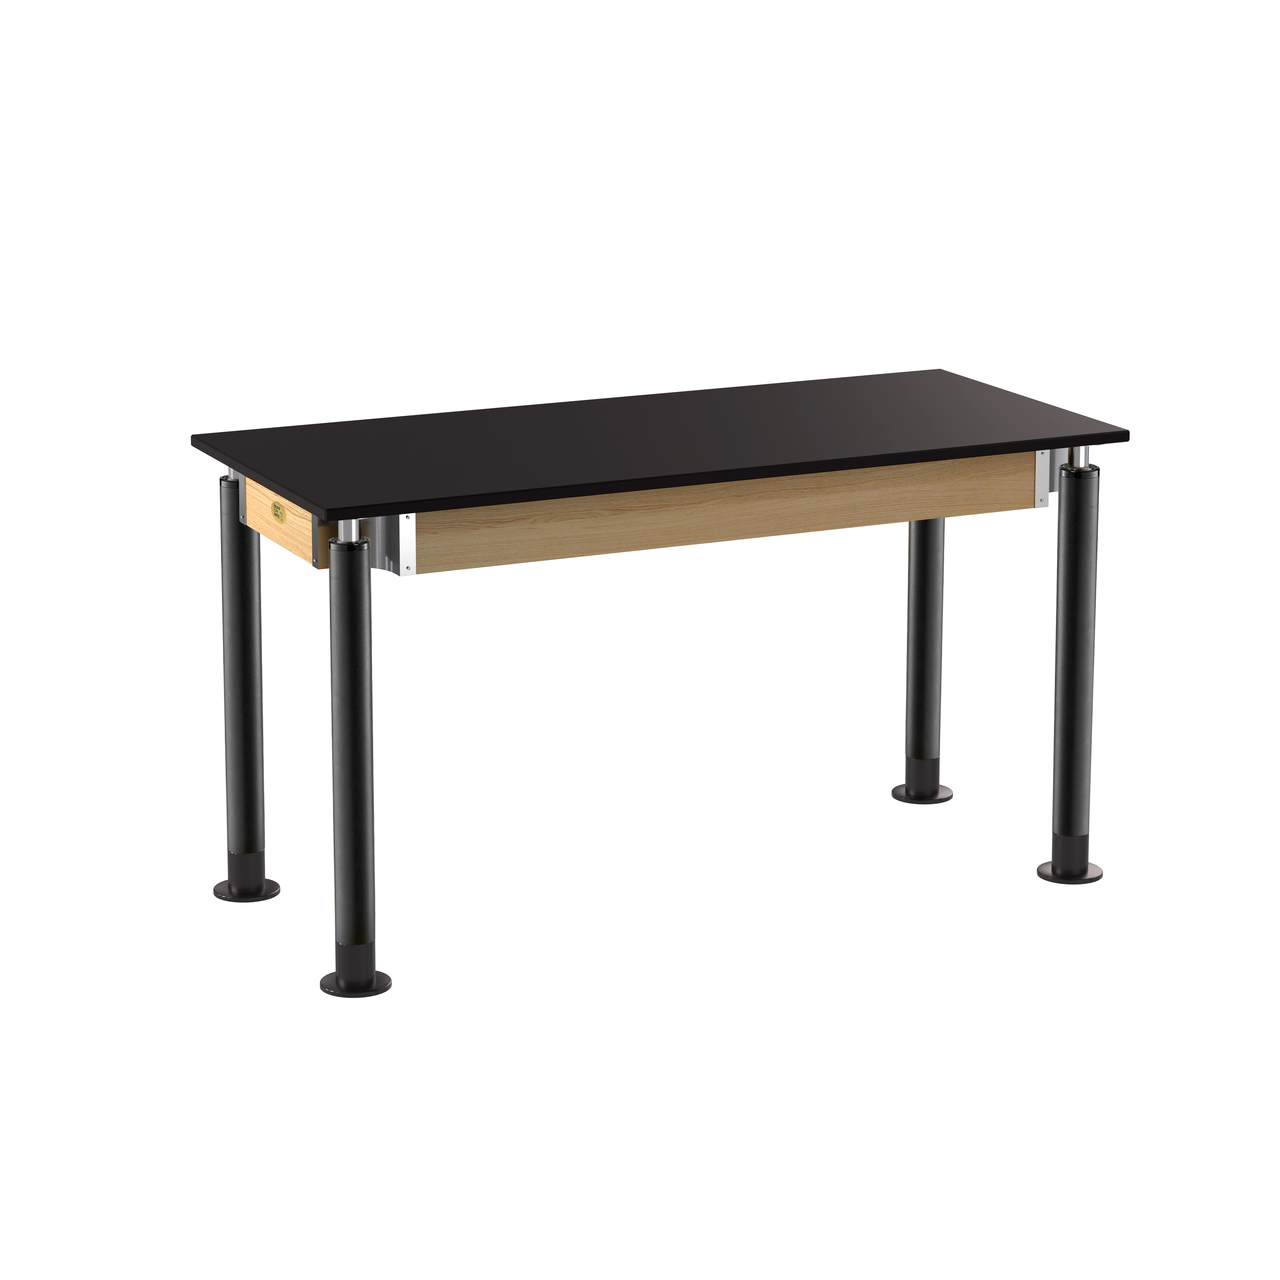 NPS Steel Science Lab Table -  24" x 54" -  Chemical Resistant Top - Black Surface Color